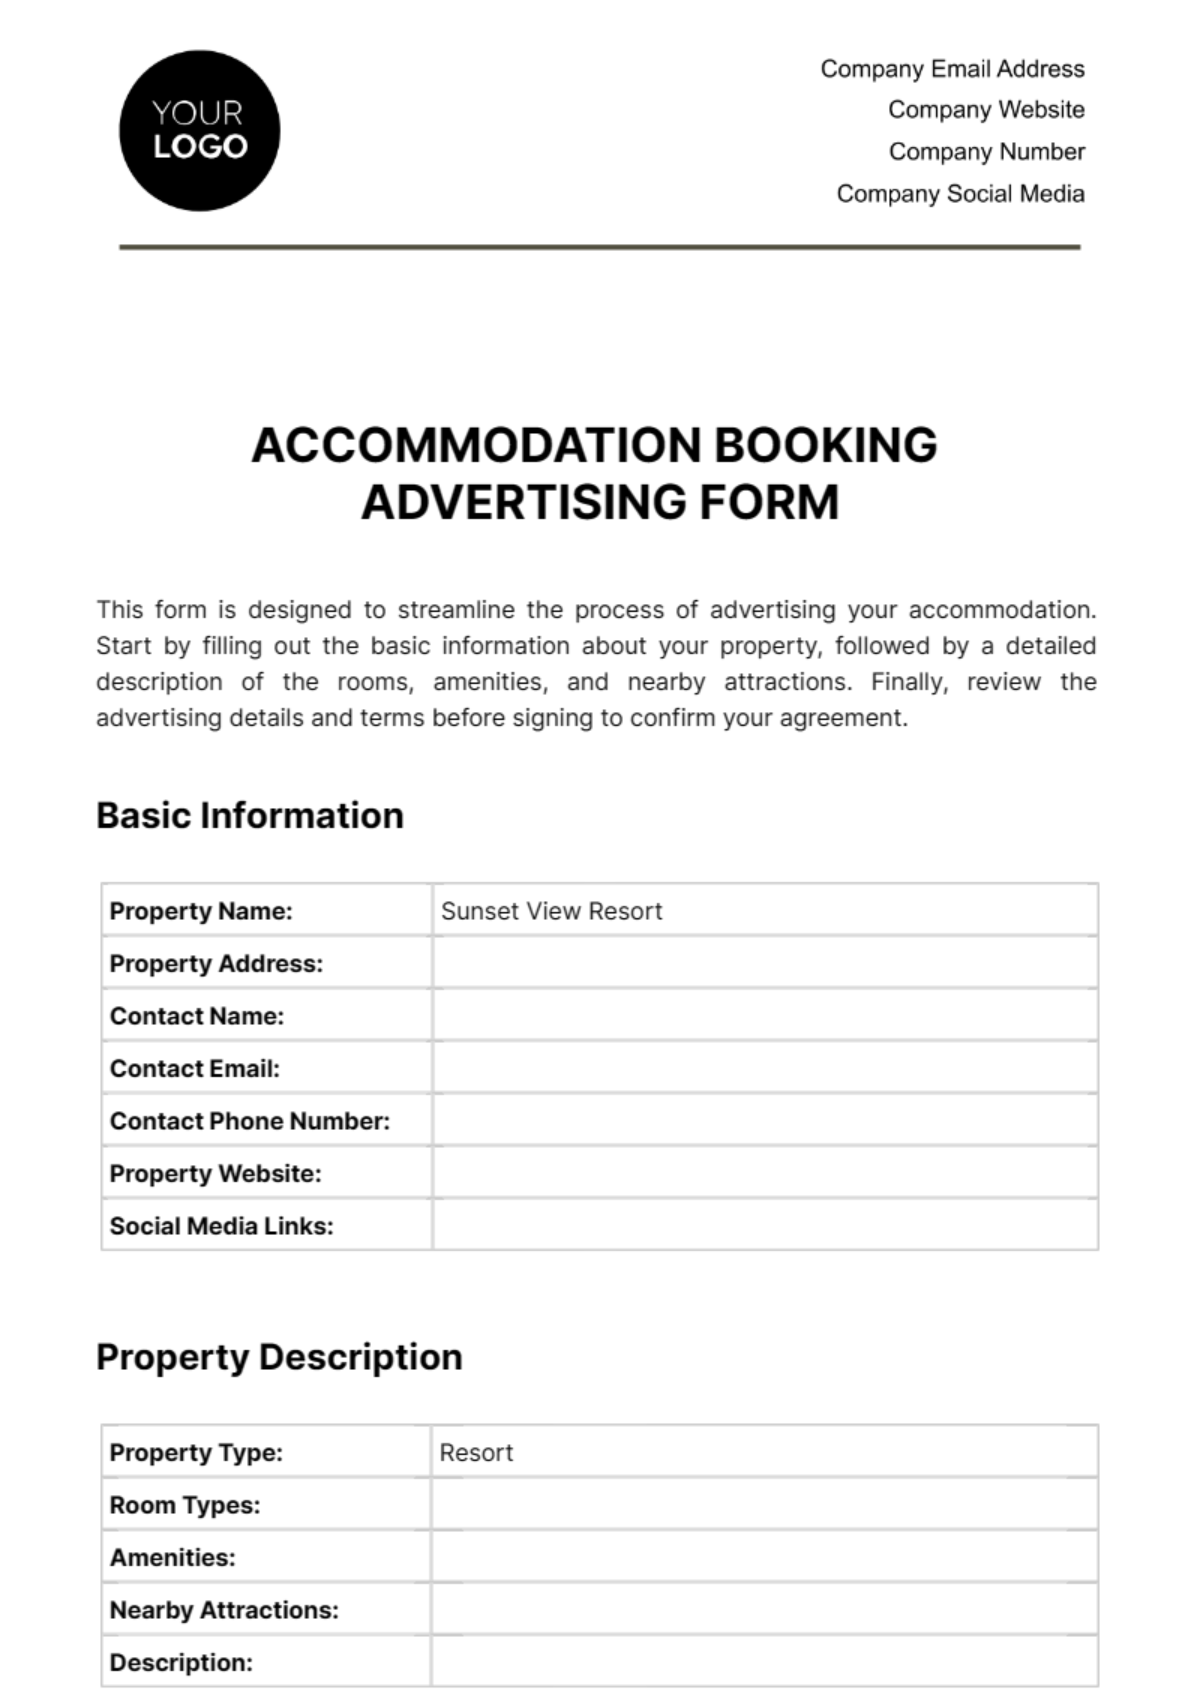 Accommodation Booking Advertising Form Template